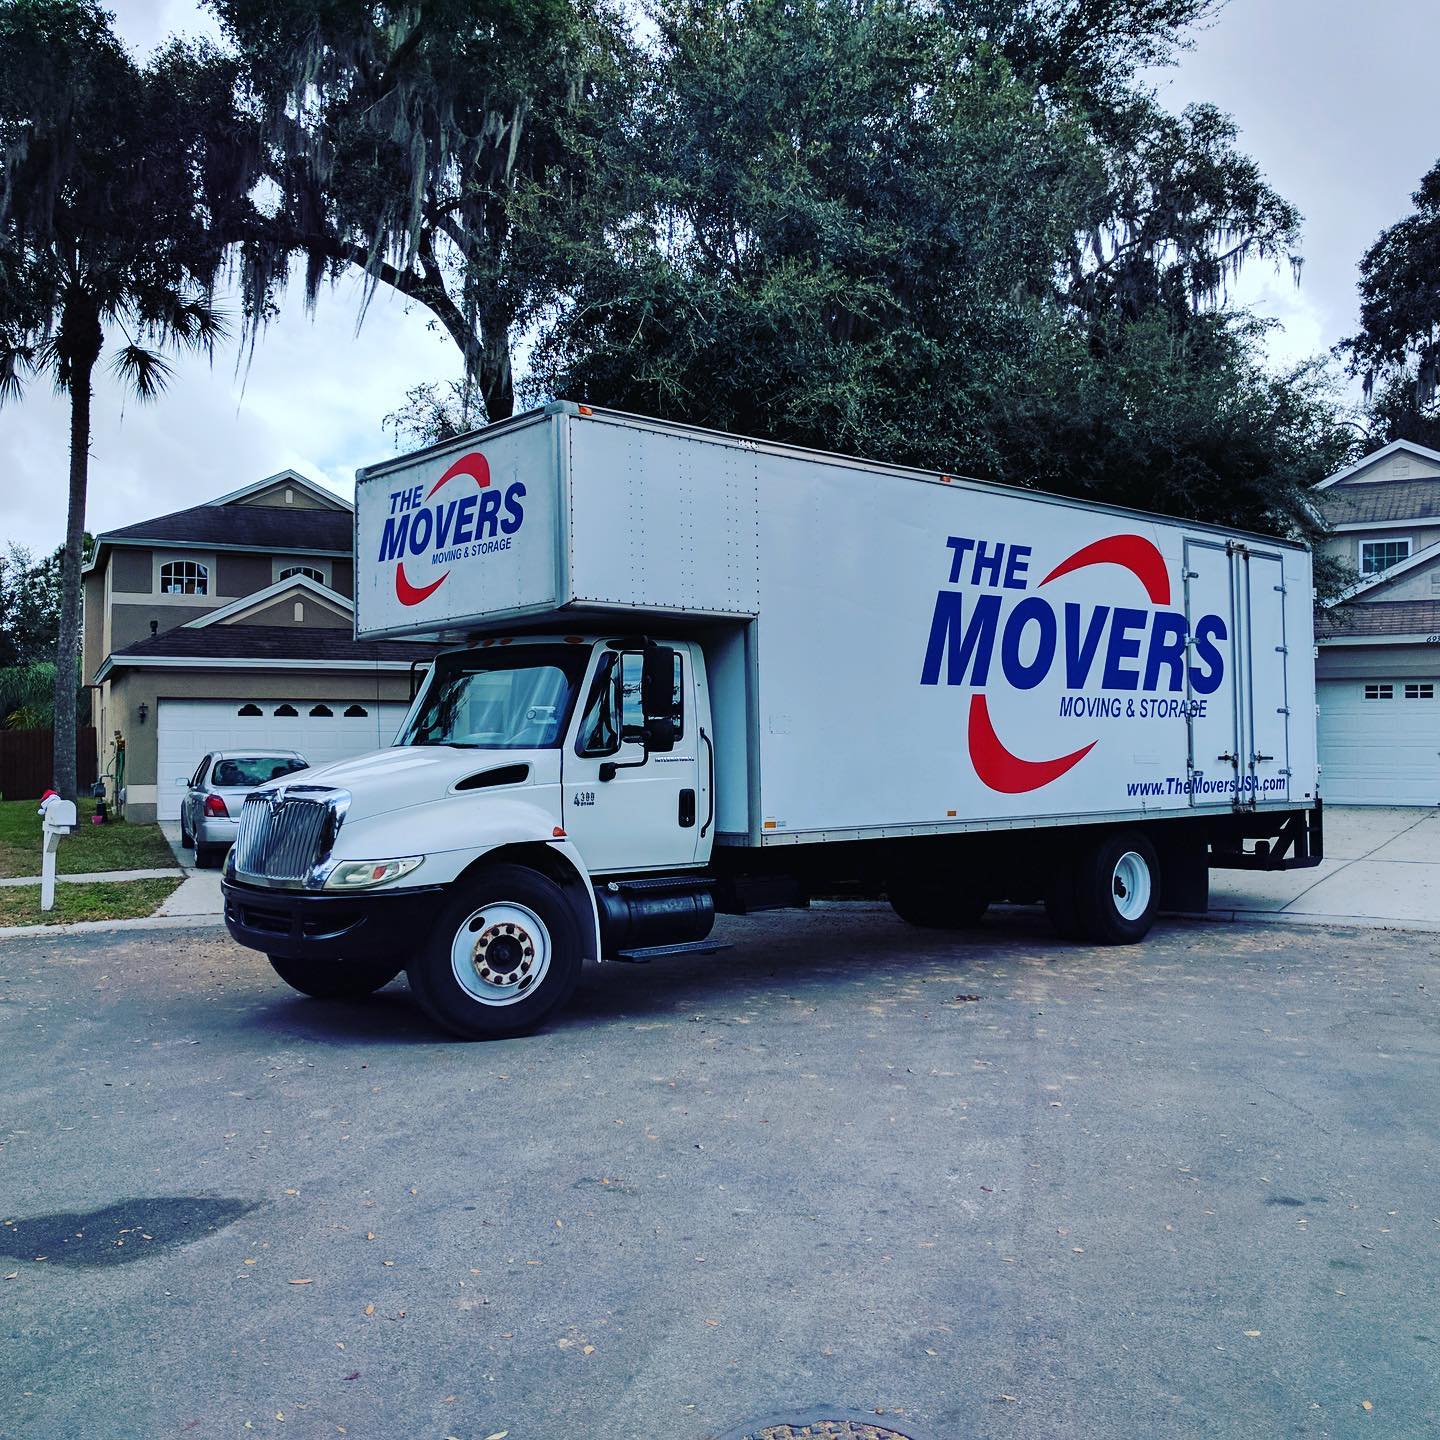 The Movers Moving & Storage Facebook Tampa